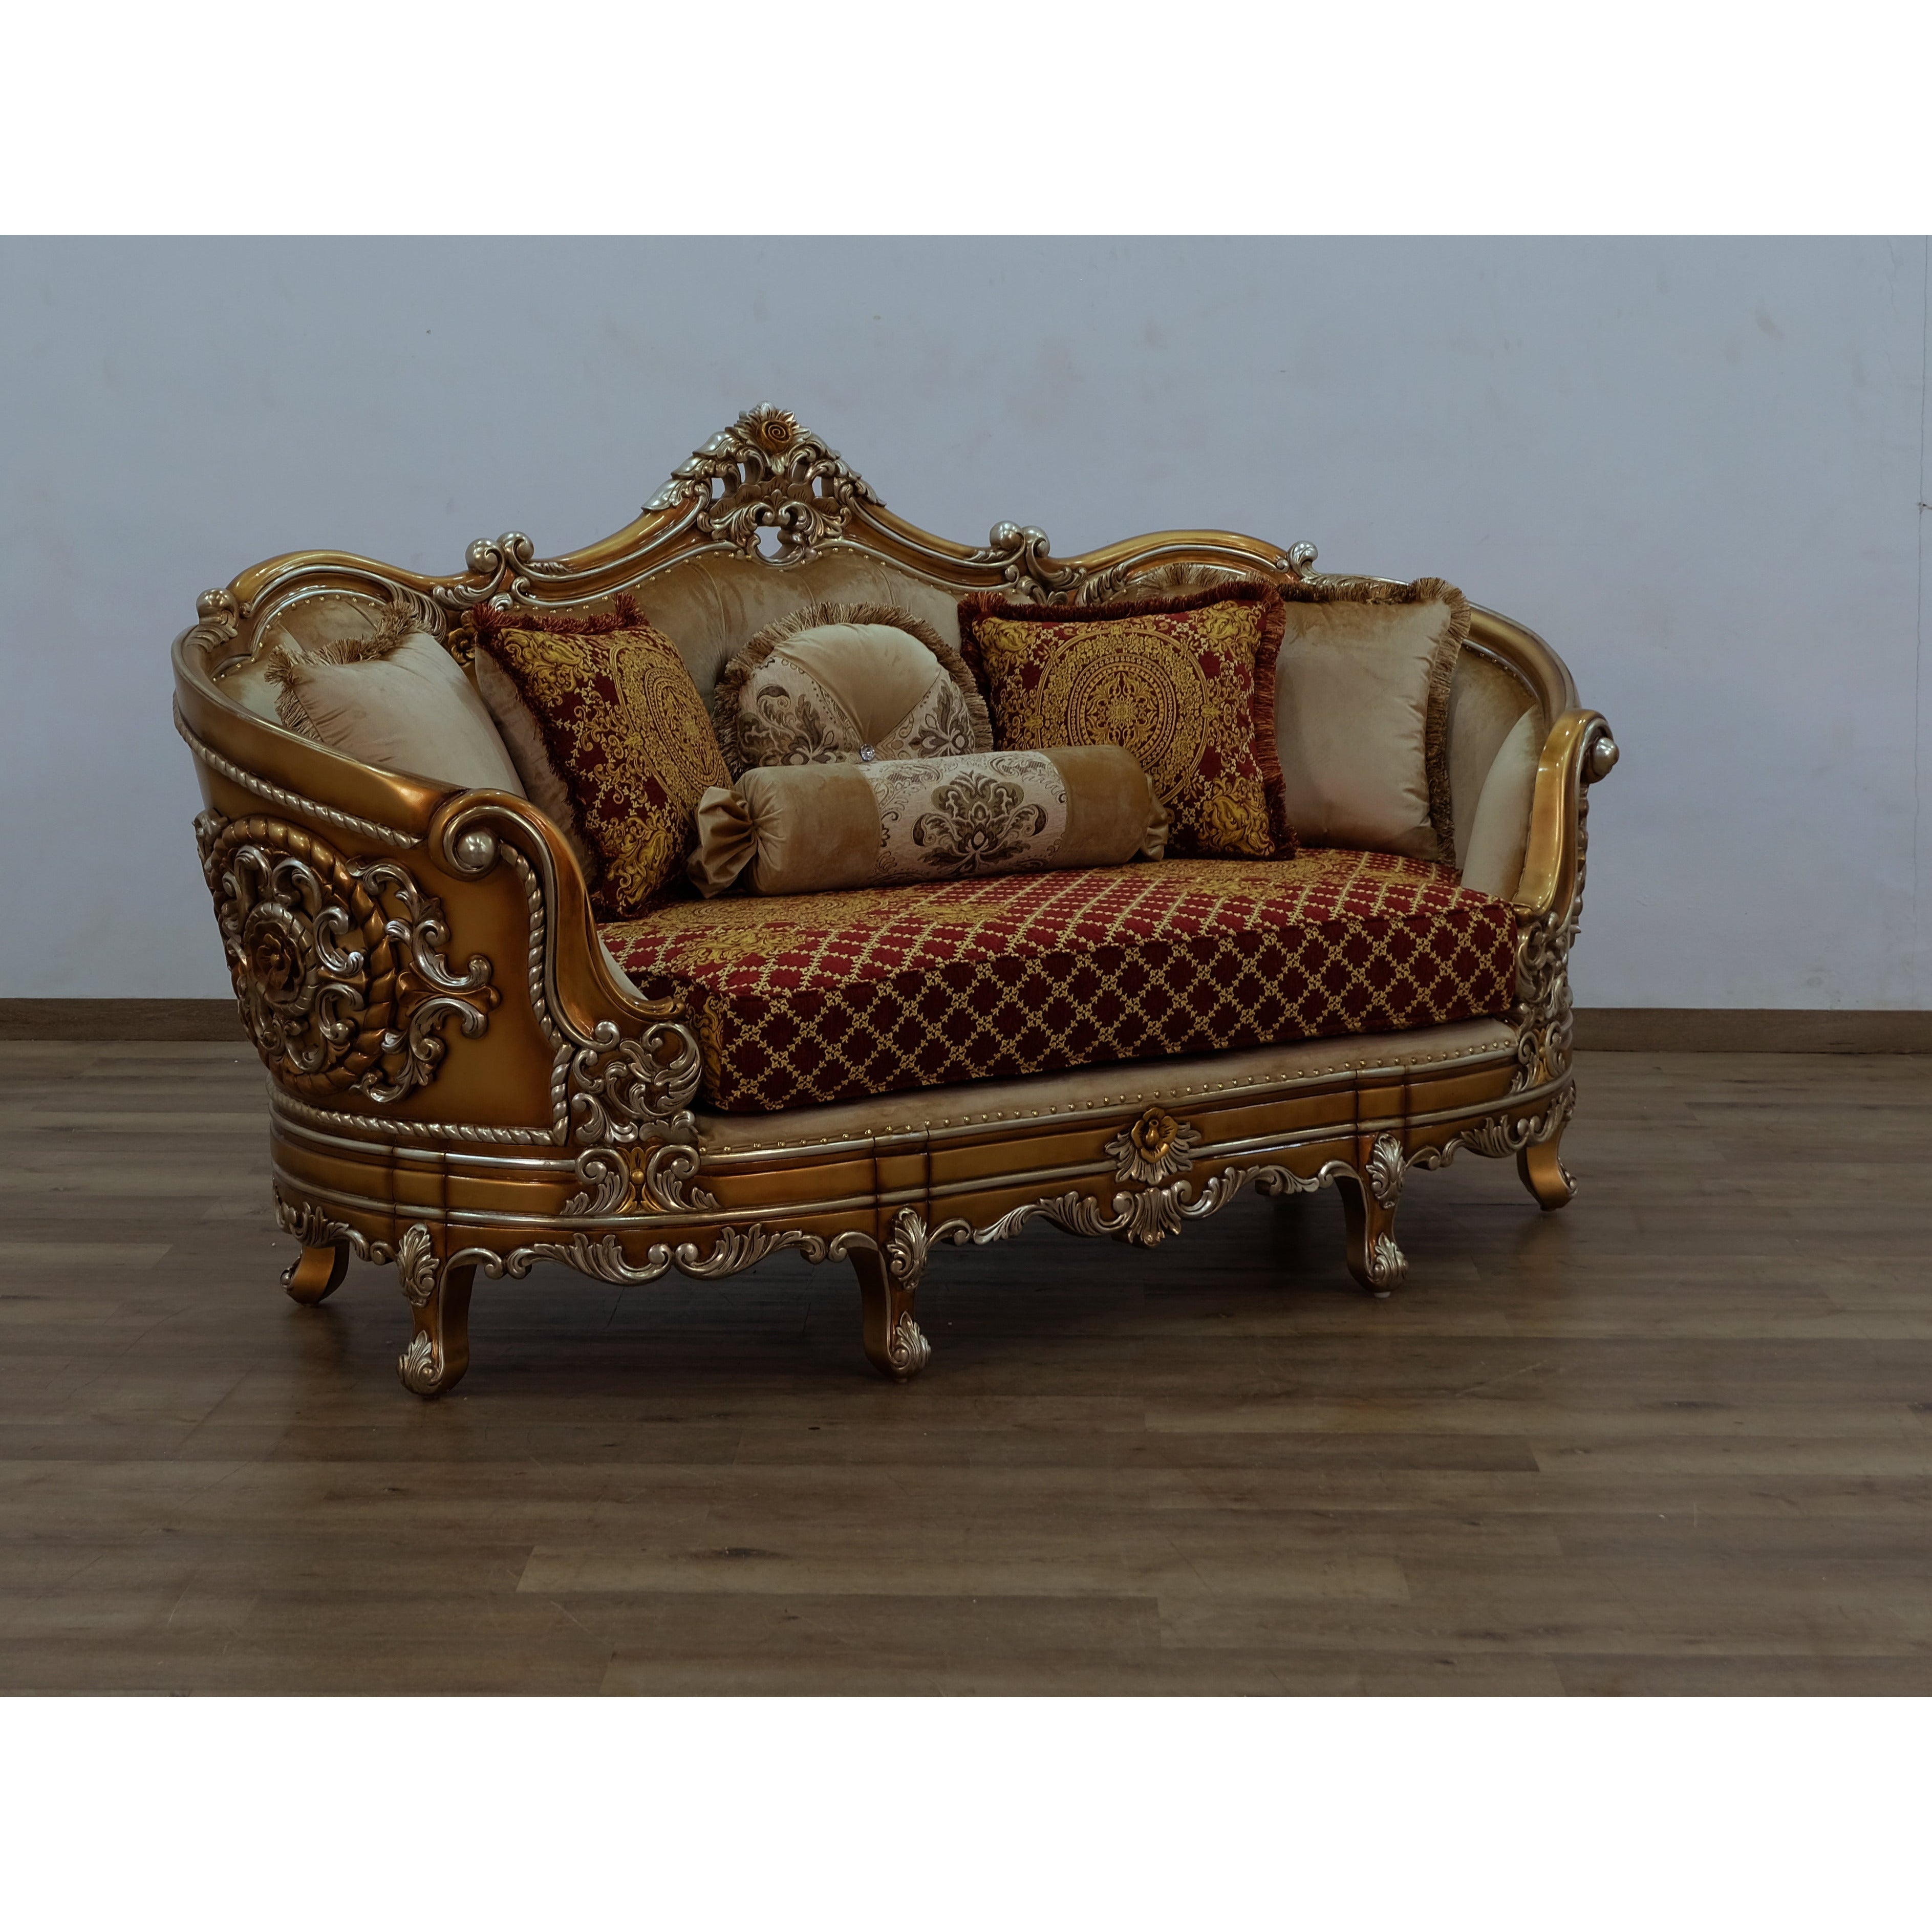 European Furniture - Saint Germain 4 Piece Luxury Living Room Set in Red Gold & Antique Silver - 35554-SL2C - New Star Living